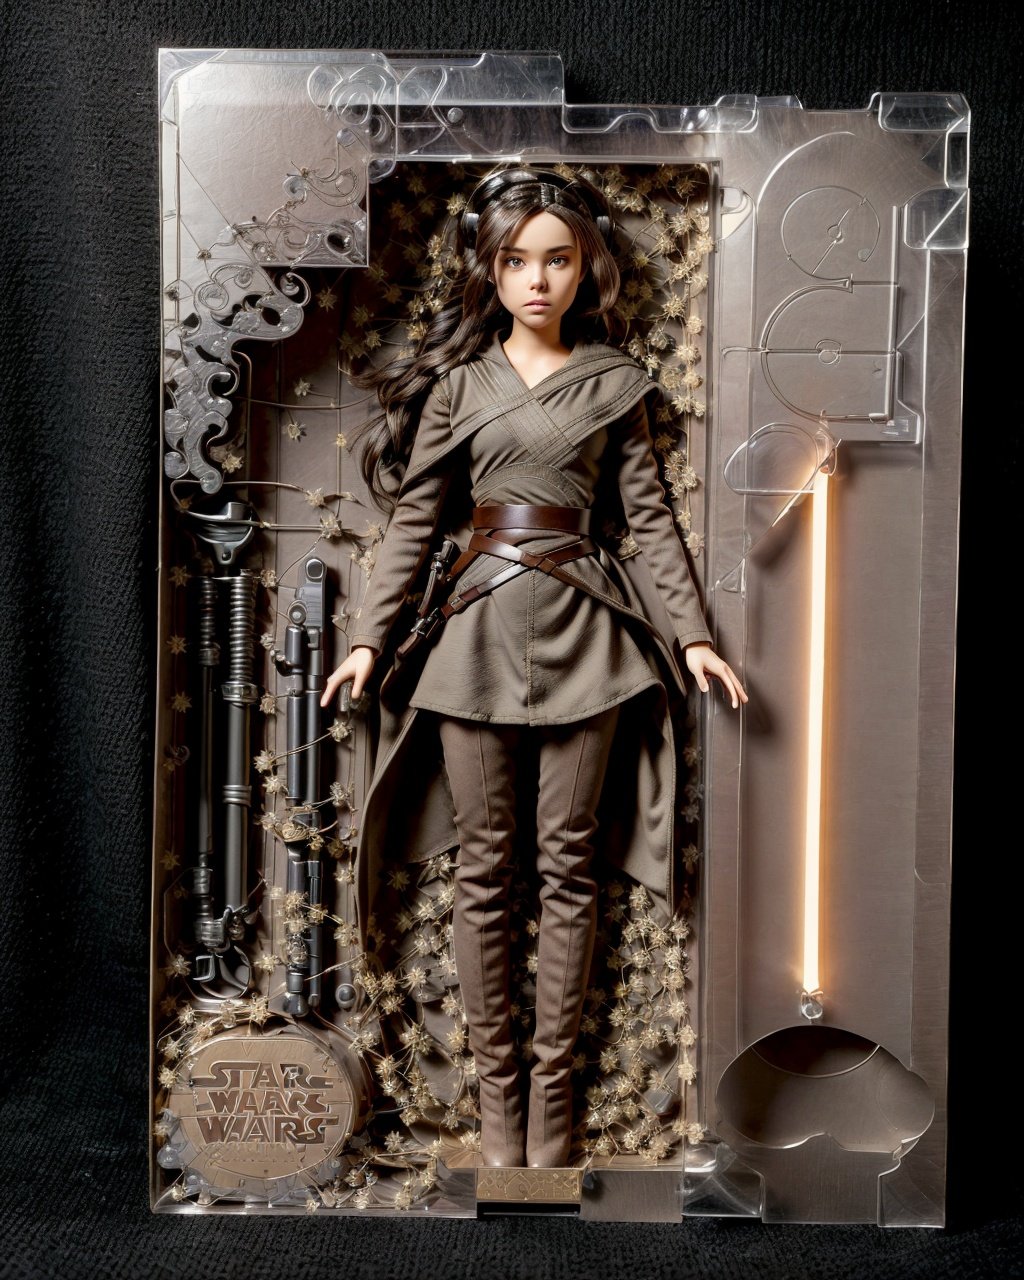 (best quality:1.15), (masterpiece:1.15), (detailed:1.15), (realistic:1.2), Dappled Light, analog style,no humans, inboxDollPlaySetQuiron style, abs, (Rey (The Last Jedi): In her attire from The Last Jedi, Rey wears a more advanced and Jedi-like outfit. Her tunic is a muted gray with long sleeves and a high neckline. The tunic is belted with a brown leather belt, emphasizing her waistline. She wears fitted black pants and knee-high black boots with subtle designs. Rey's beige-colored outer cloak, made of textured fabric, falls to ankle-length and is fastened with a decorative clasp. Additionally, she carries a lightsaber, a powerful weapon in the Star Wars universe, indicating her connection to the Force.:1.2), gift box, playset, in a box, full body, toy playset pack, in a gift box, premium playset toy box, <lora:quiron_inboxDollPlaySet_v2_lora:1>